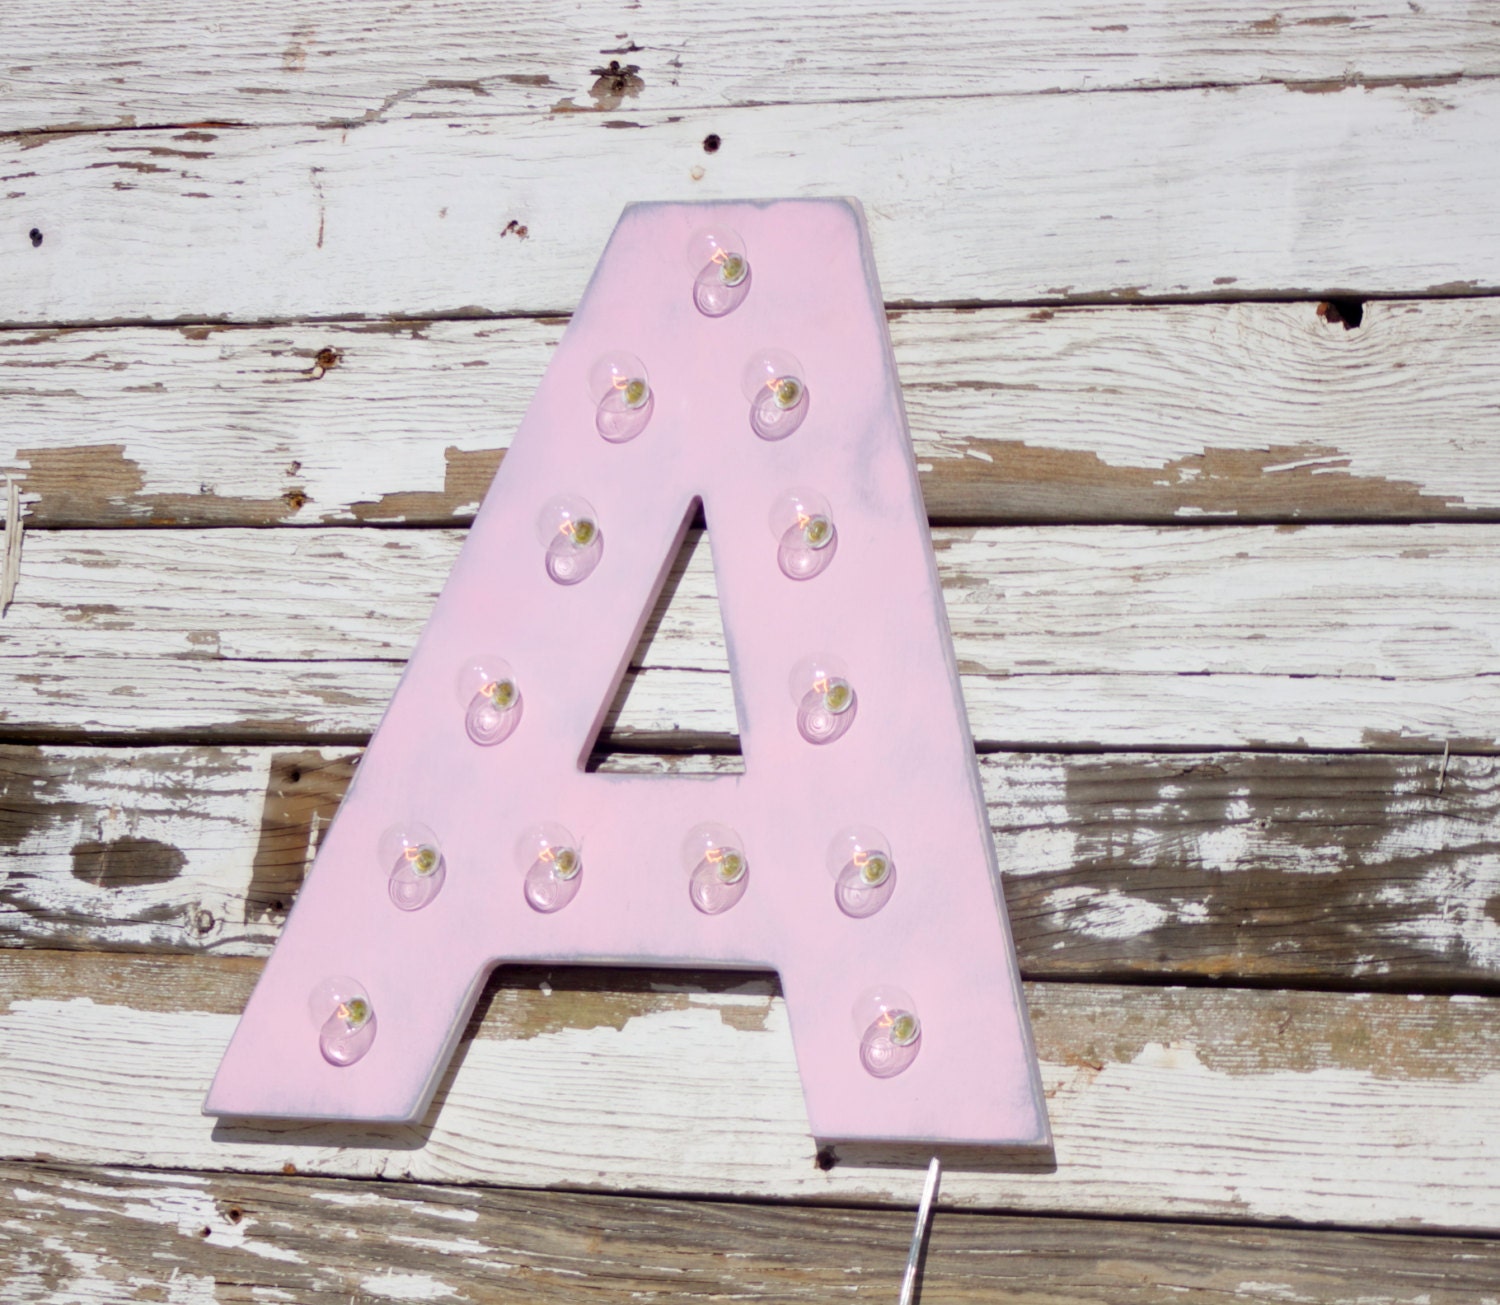 24 Marquee Letter Or Number Lighted Sign Wood A B C D